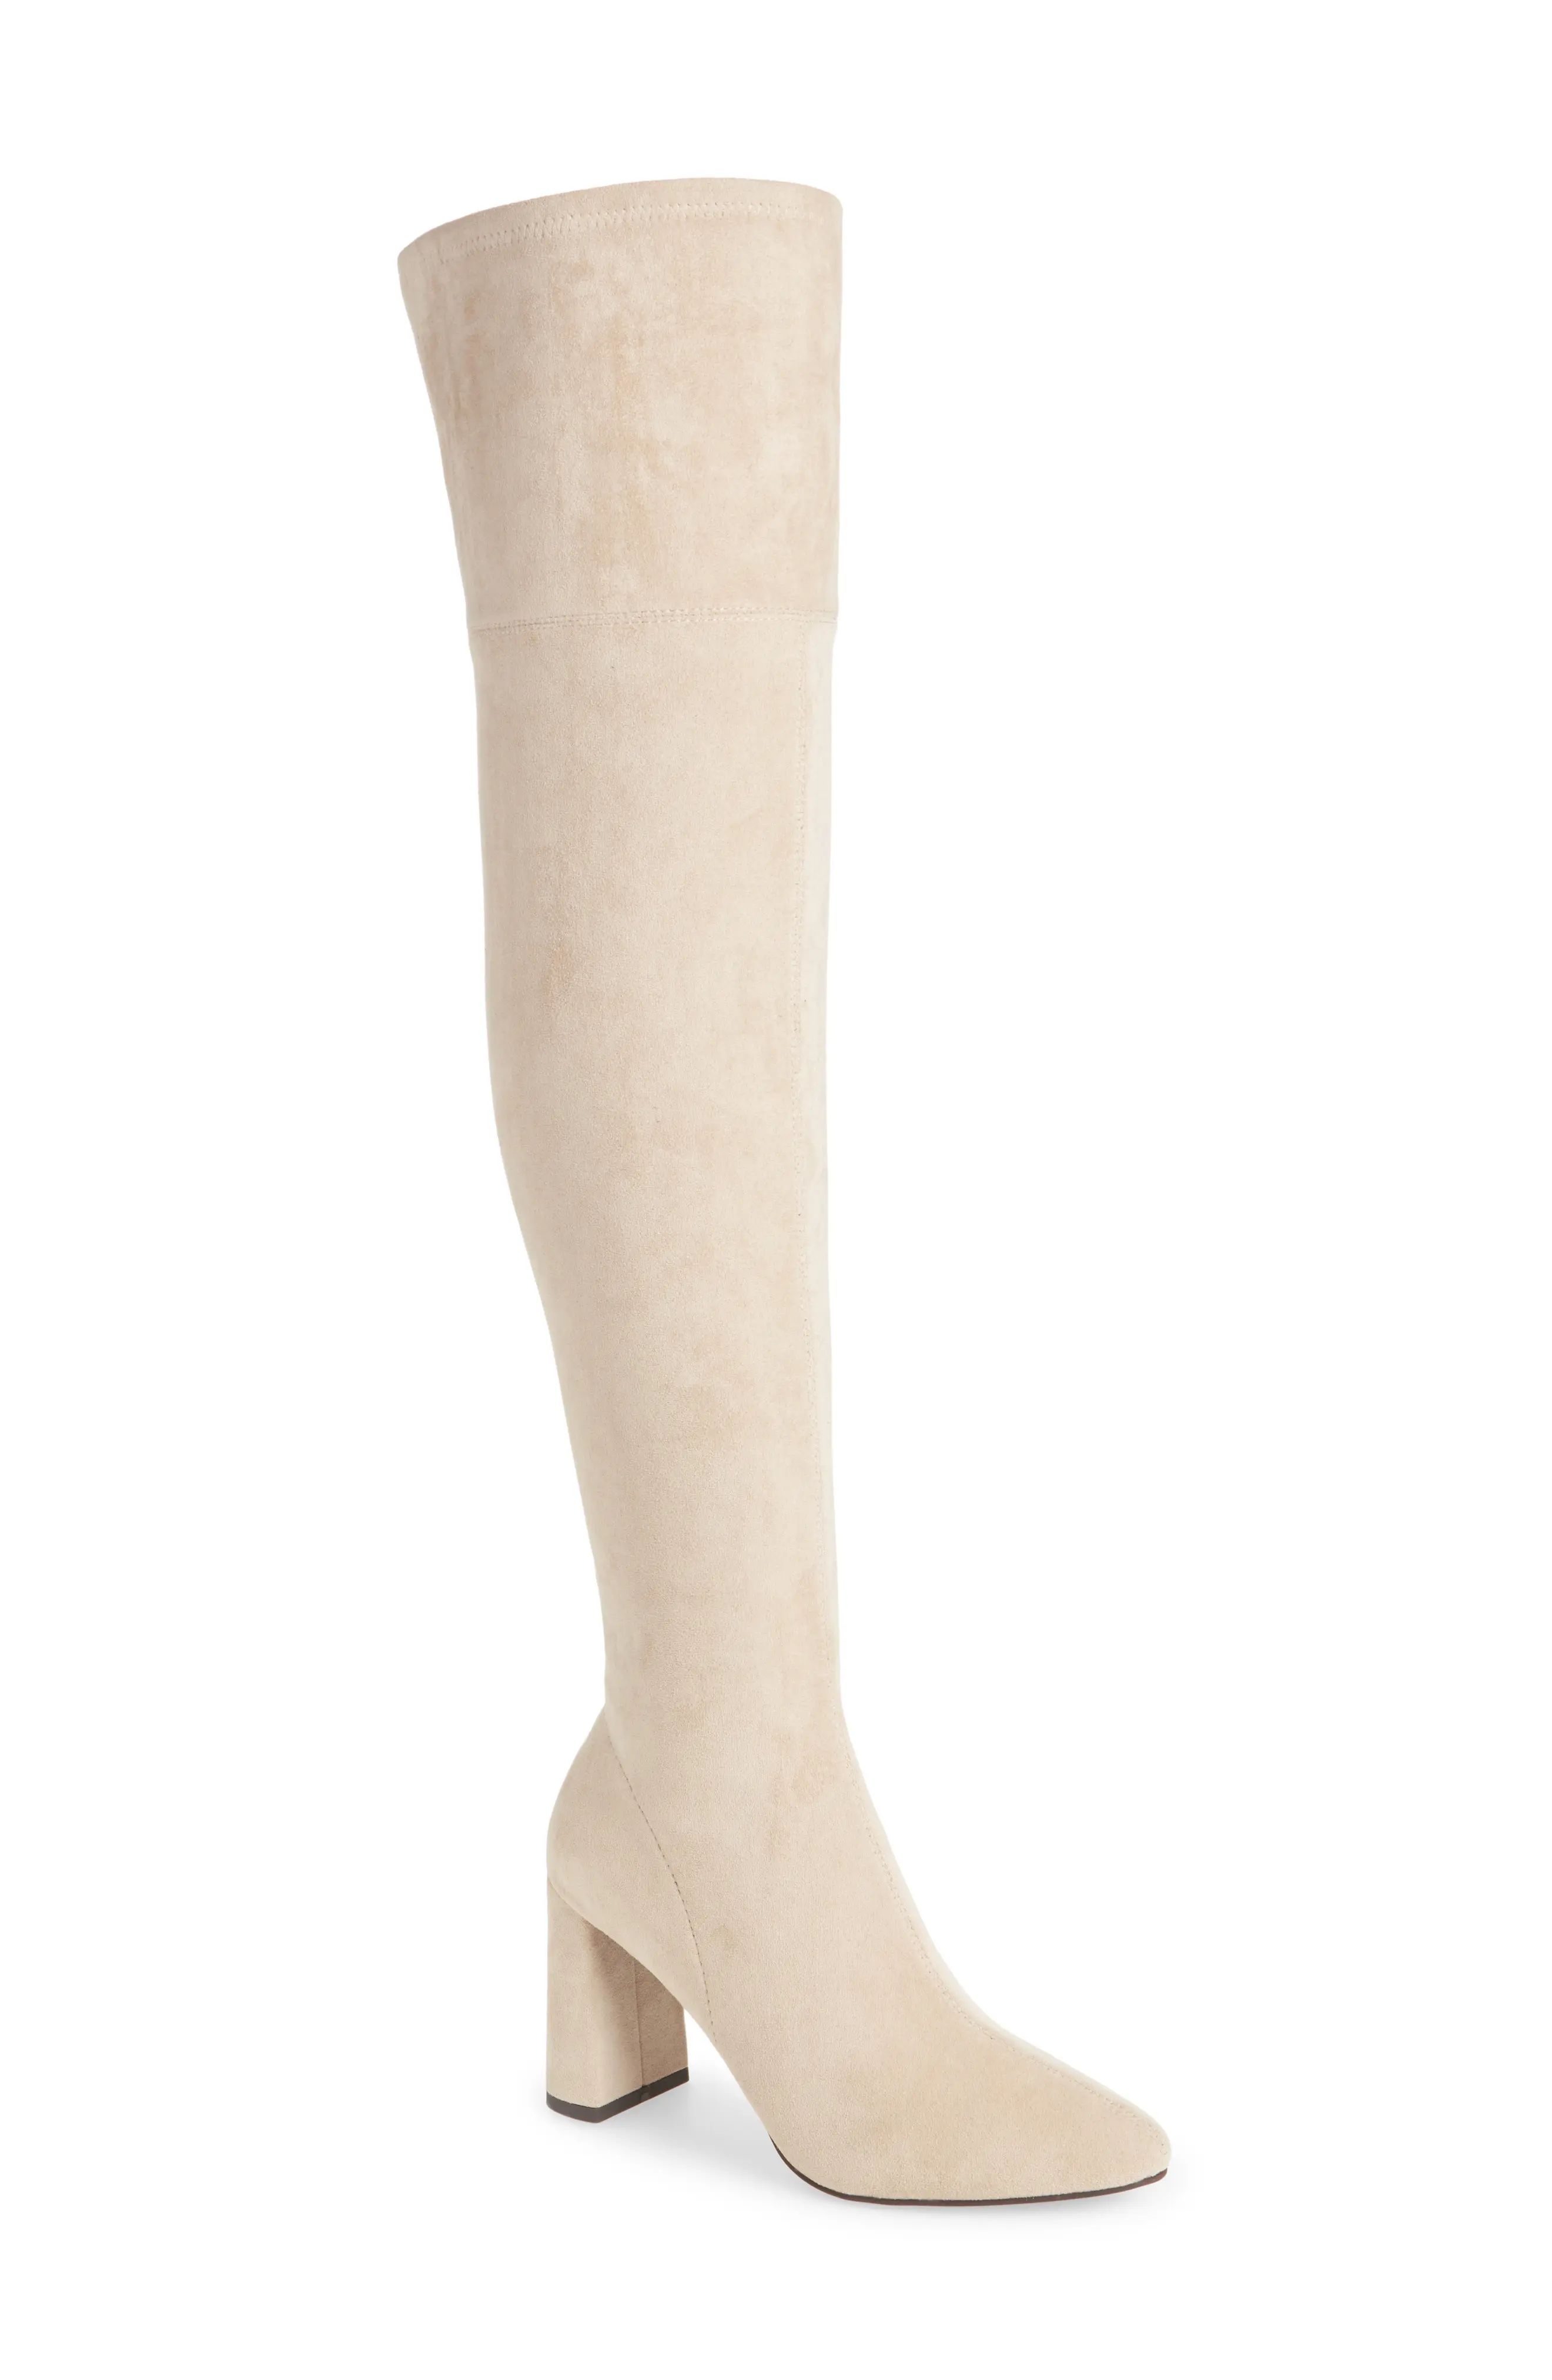 Jeffrey Campbell Parisah Over the Knee Boot, Size 11 in Ice Suede at Nordstrom | Nordstrom